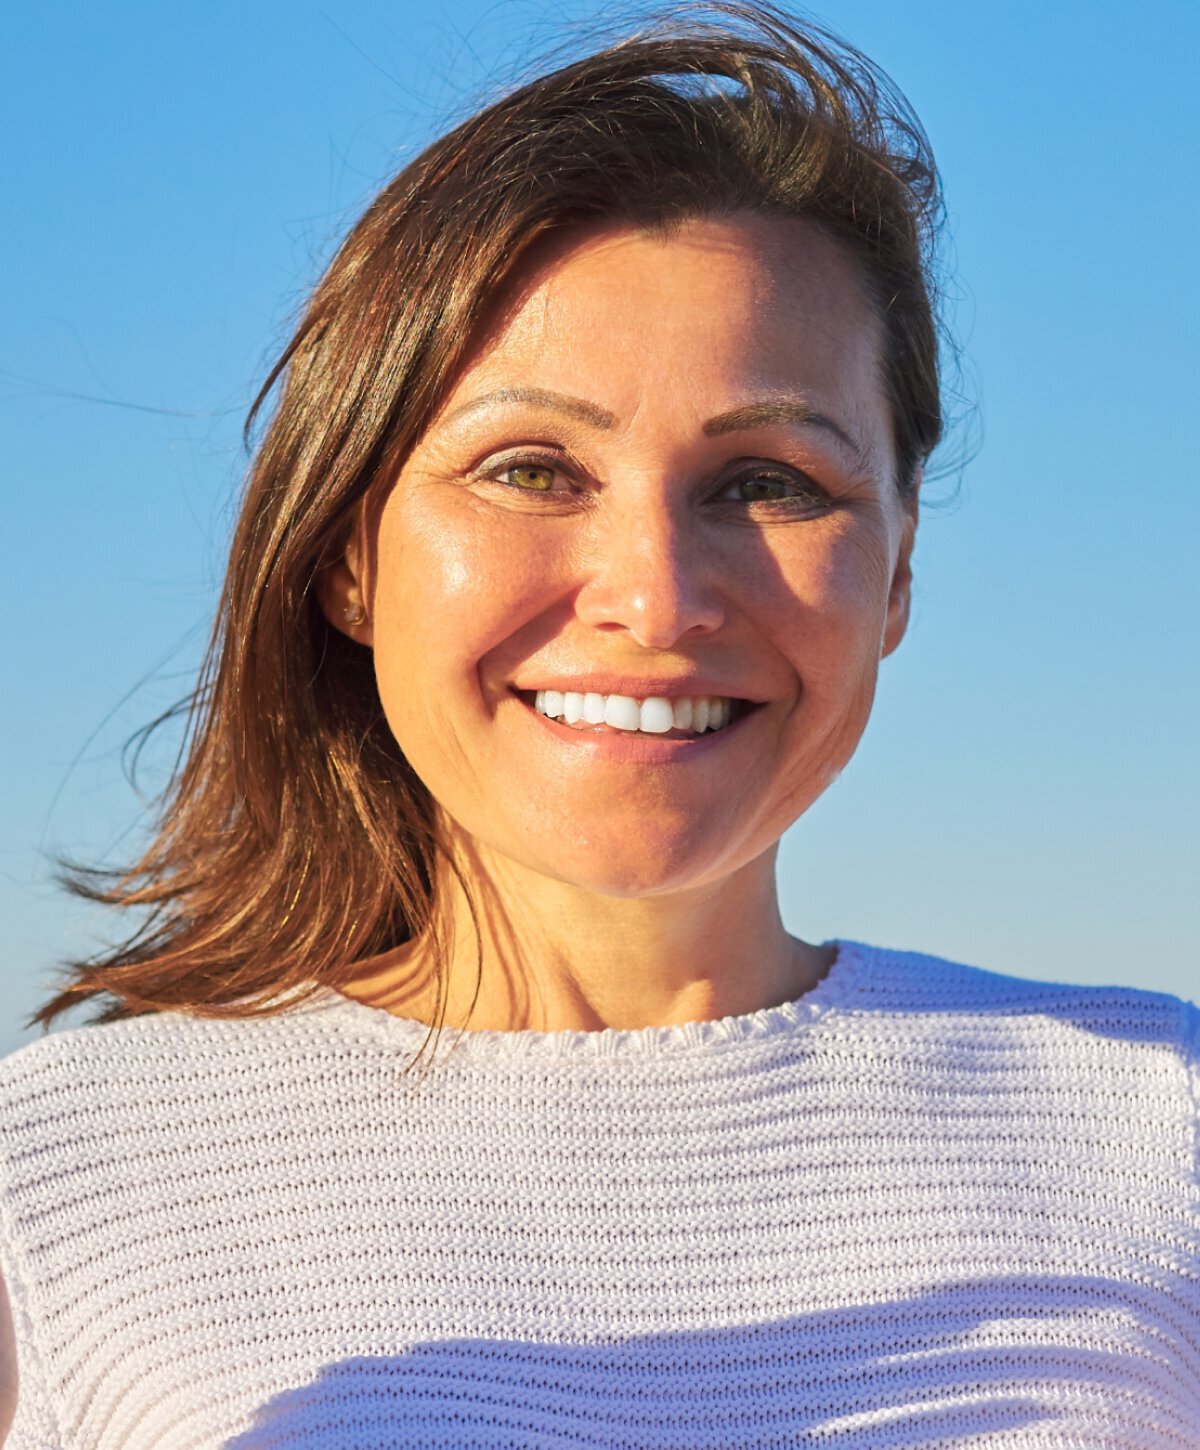 Ponte Vedra Beach Skin Cancer Excision model smiling